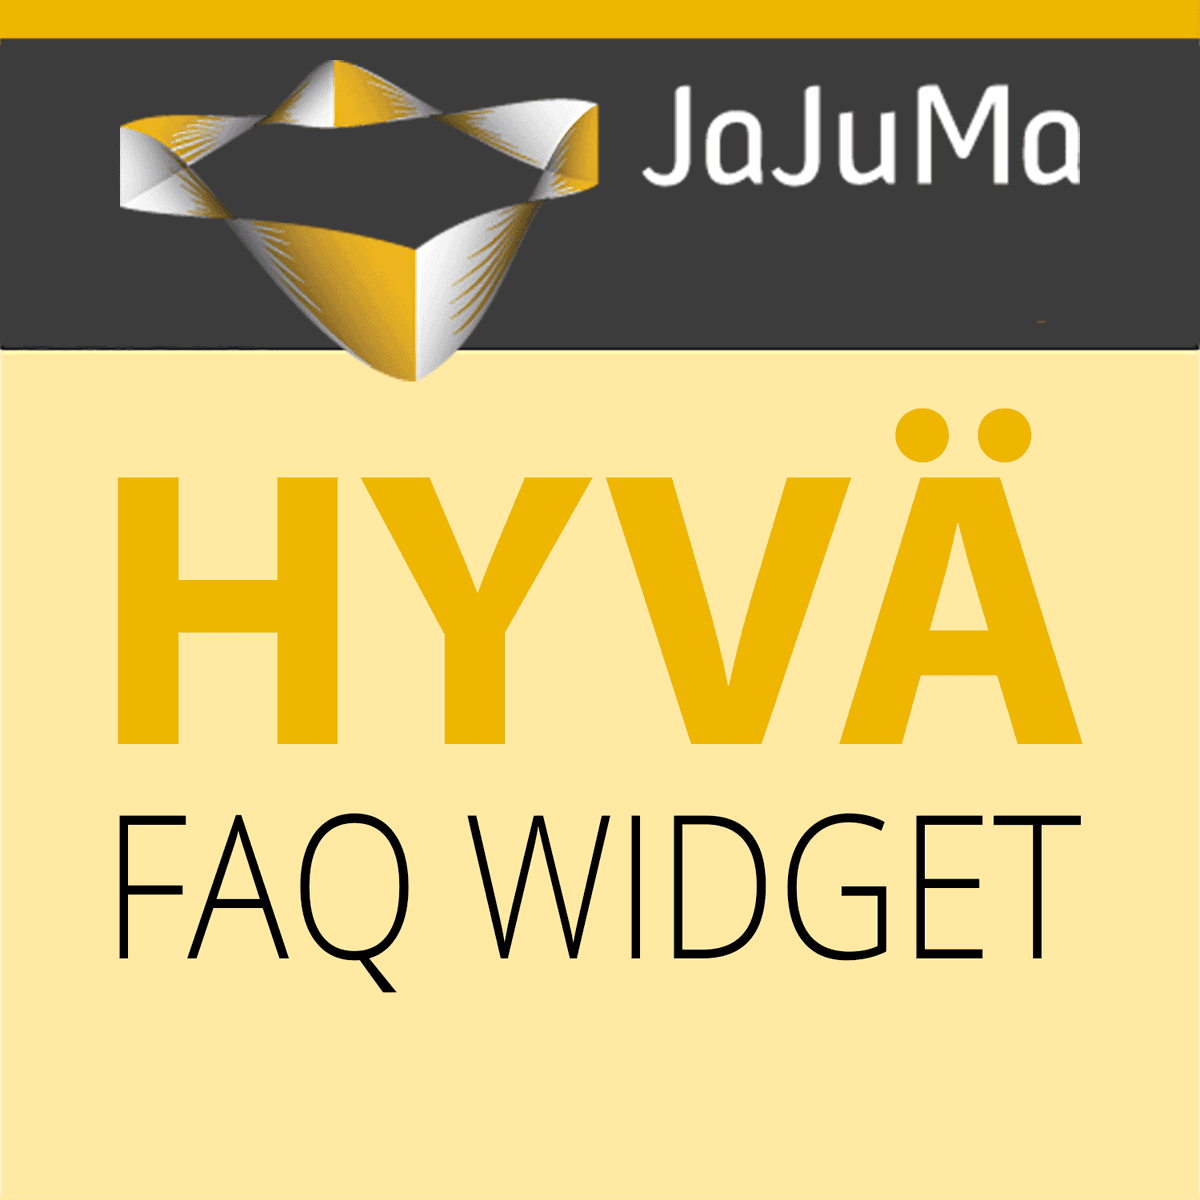 Our Hyvä FAQ Widget for #Magento2 & #Hyvä #Theme allows adding FAQs to any CMS, Page Builder, or WYSIWYG content easily. 😎🤓

🚀 tinyurl.com/ysk94d4d 🚀

Stay tuned for more #Hyvä for free 🔥

#Magento #HyväThemes #performance #webperf #corewebvitals #cwv #magento2extensions